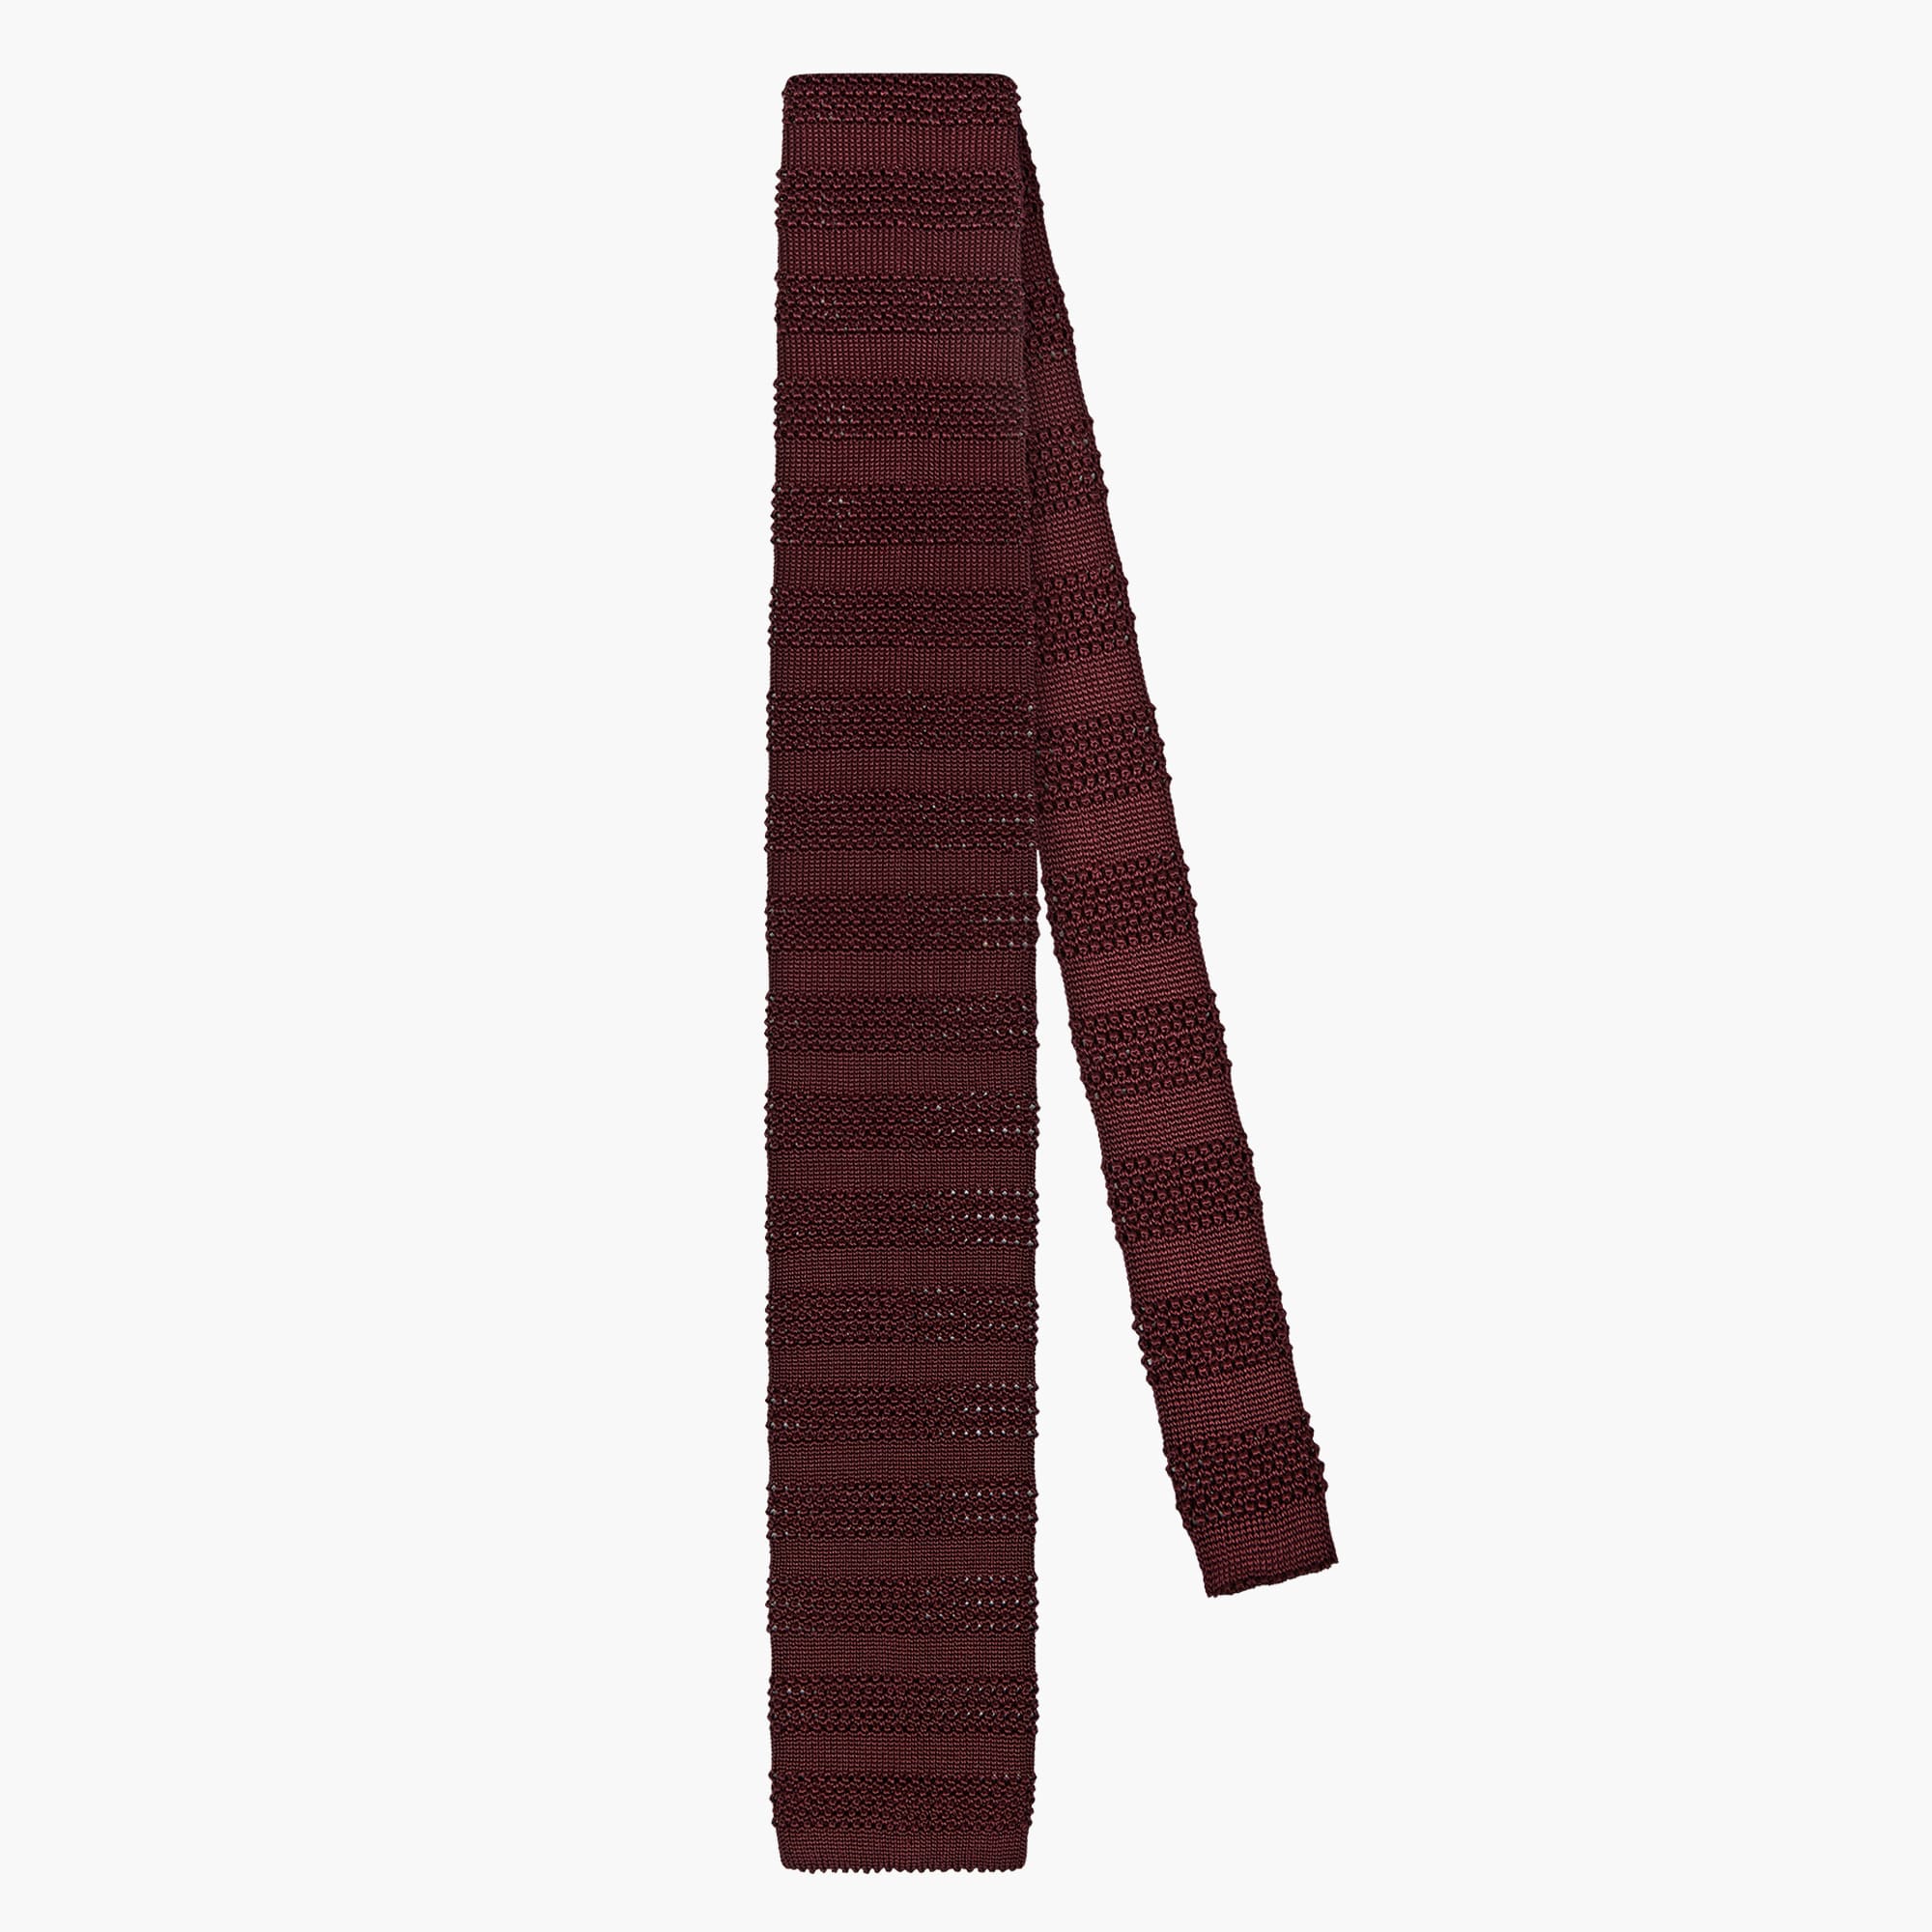 Knitted Solid Tie - Burgundy